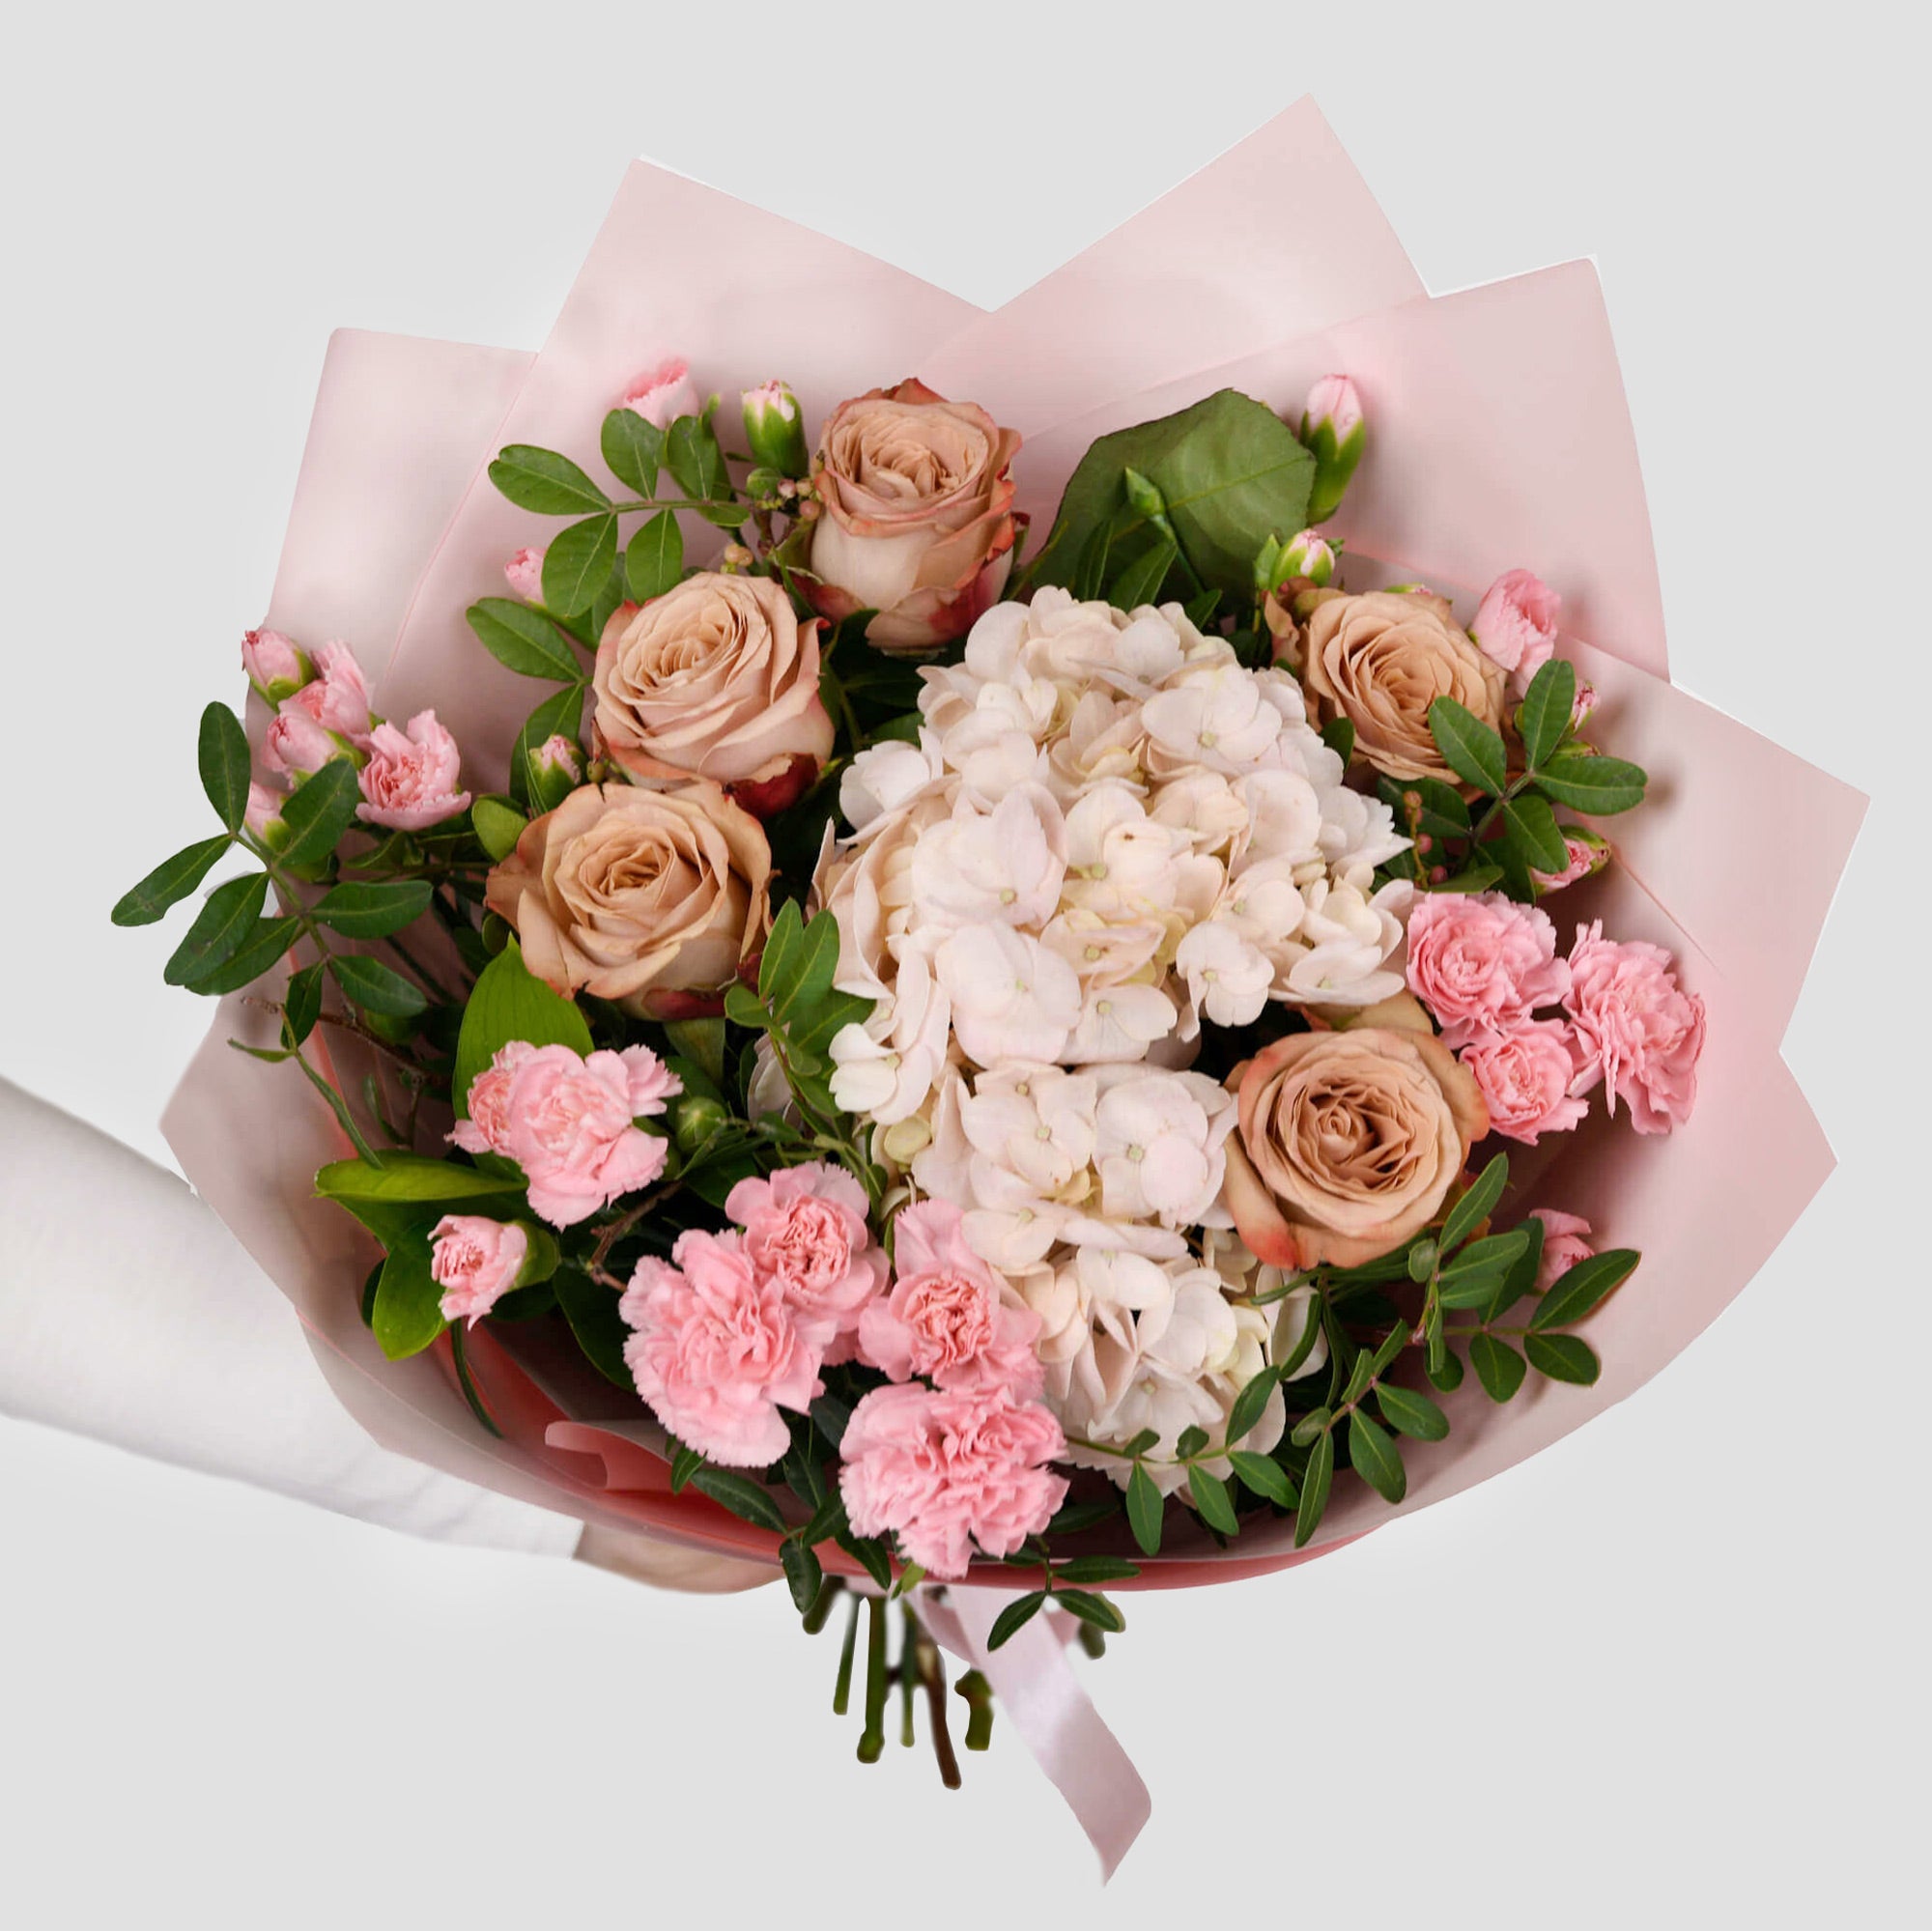 Bouquet with pink hydrangea and roses